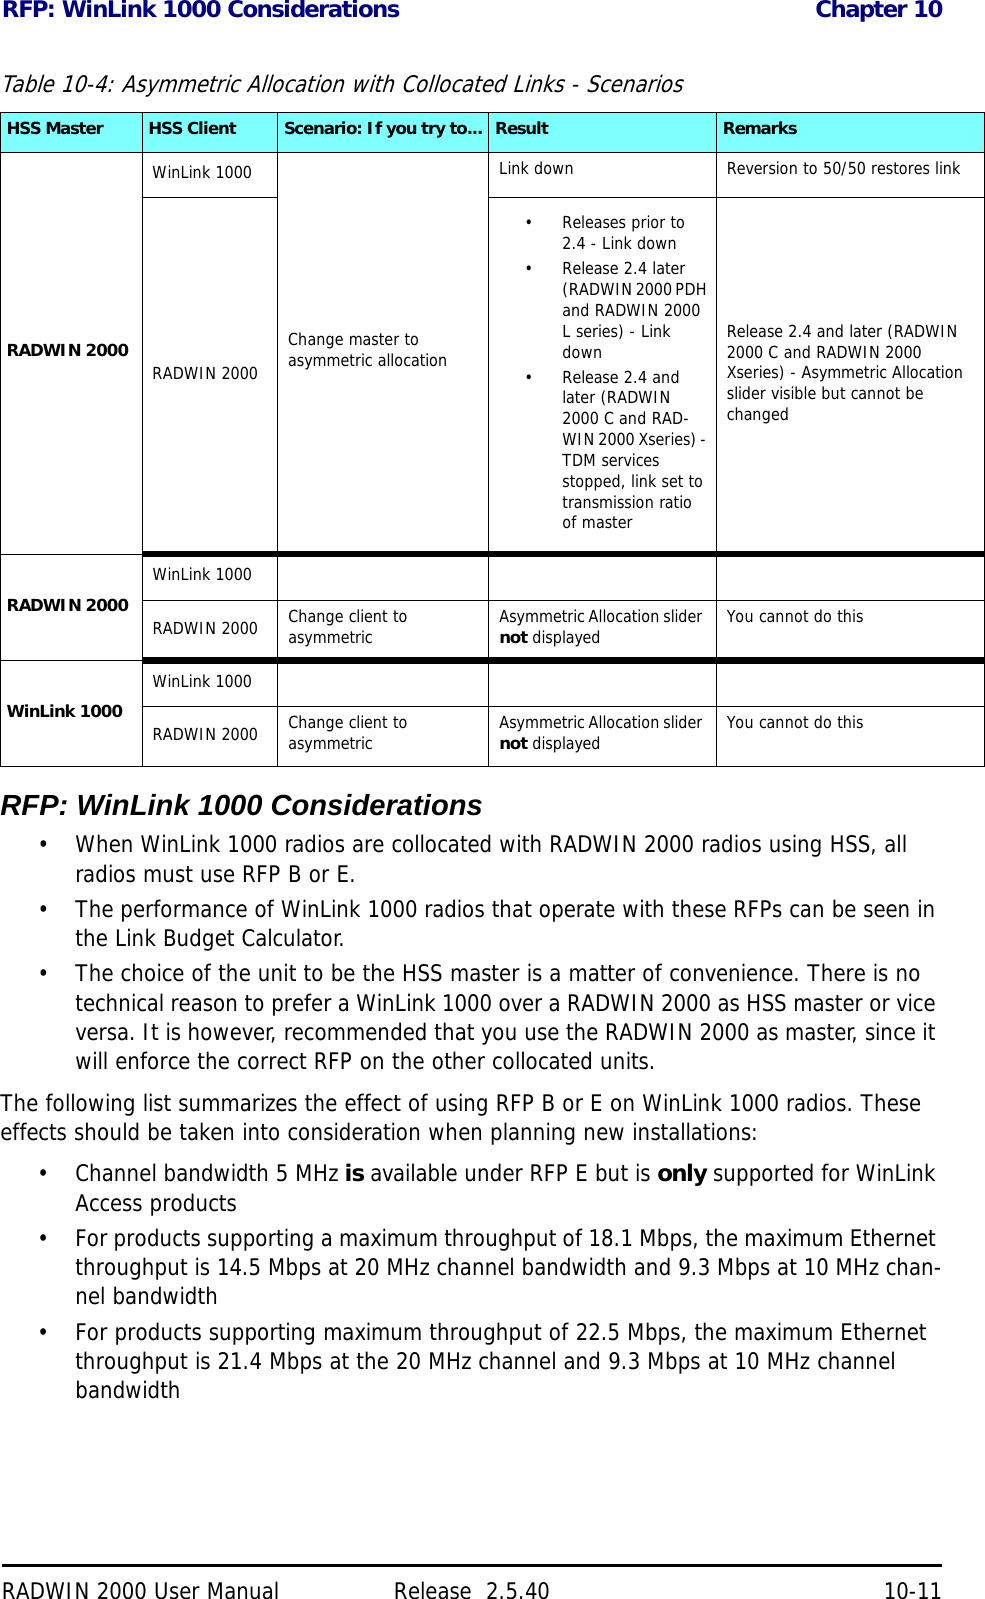 RFP: WinLink 1000 Considerations Chapter 10RADWIN 2000 User Manual Release  2.5.40 10-11RFP: WinLink 1000 Considerations• When WinLink 1000 radios are collocated with RADWIN 2000 radios using HSS, all radios must use RFP B or E. • The performance of WinLink 1000 radios that operate with these RFPs can be seen in the Link Budget Calculator. • The choice of the unit to be the HSS master is a matter of convenience. There is no technical reason to prefer a WinLink 1000 over a RADWIN 2000 as HSS master or vice versa. It is however, recommended that you use the RADWIN 2000 as master, since it will enforce the correct RFP on the other collocated units.The following list summarizes the effect of using RFP B or E on WinLink 1000 radios. These effects should be taken into consideration when planning new installations:• Channel bandwidth 5 MHz is available under RFP E but is only supported for WinLink Access products• For products supporting a maximum throughput of 18.1 Mbps, the maximum Ethernet throughput is 14.5 Mbps at 20 MHz channel bandwidth and 9.3 Mbps at 10 MHz chan-nel bandwidth• For products supporting maximum throughput of 22.5 Mbps, the maximum Ethernet throughput is 21.4 Mbps at the 20 MHz channel and 9.3 Mbps at 10 MHz channel bandwidthTable 10-4: Asymmetric Allocation with Collocated Links - ScenariosHSS Master HSS Client Scenario: If you try to... Result RemarksRADWIN 2000WinLink 1000Change master to asymmetric allocationLink down Reversion to 50/50 restores linkRADWIN 2000• Releases prior to 2.4 - Link down• Release 2.4 later (RADWIN 2000 PDH and RADWIN 2000 L series) - Link down• Release 2.4 and later (RADWIN 2000 C and RAD-WIN 2000 Xseries) - TDM services stopped, link set to transmission ratio of masterRelease 2.4 and later (RADWIN 2000 C and RADWIN 2000 Xseries) - Asymmetric Allocation slider visible but cannot be changedRADWIN 2000WinLink 1000RADWIN 2000 Change client to asymmetric Asymmetric Allocation slider not displayed You cannot do thisWinLink 1000WinLink 1000RADWIN 2000 Change client to asymmetric Asymmetric Allocation slider not displayed You cannot do this